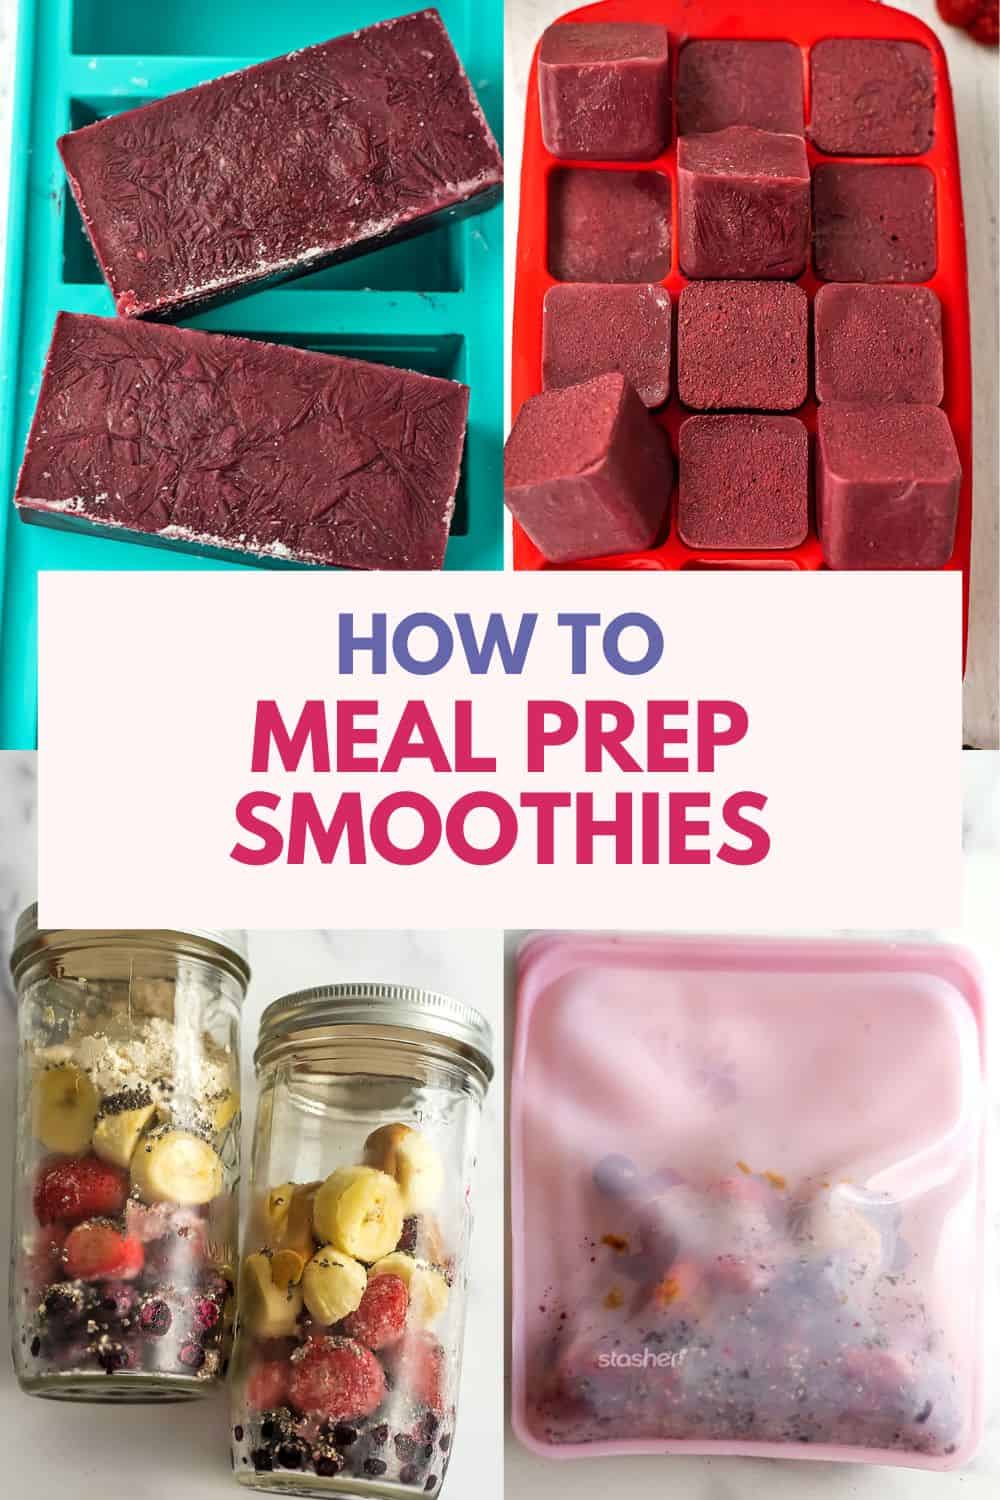 https://bitesofwellness.com/wp-content/uploads/2023/09/how-to-meal-prep-smoothies-for-the-week.jpg